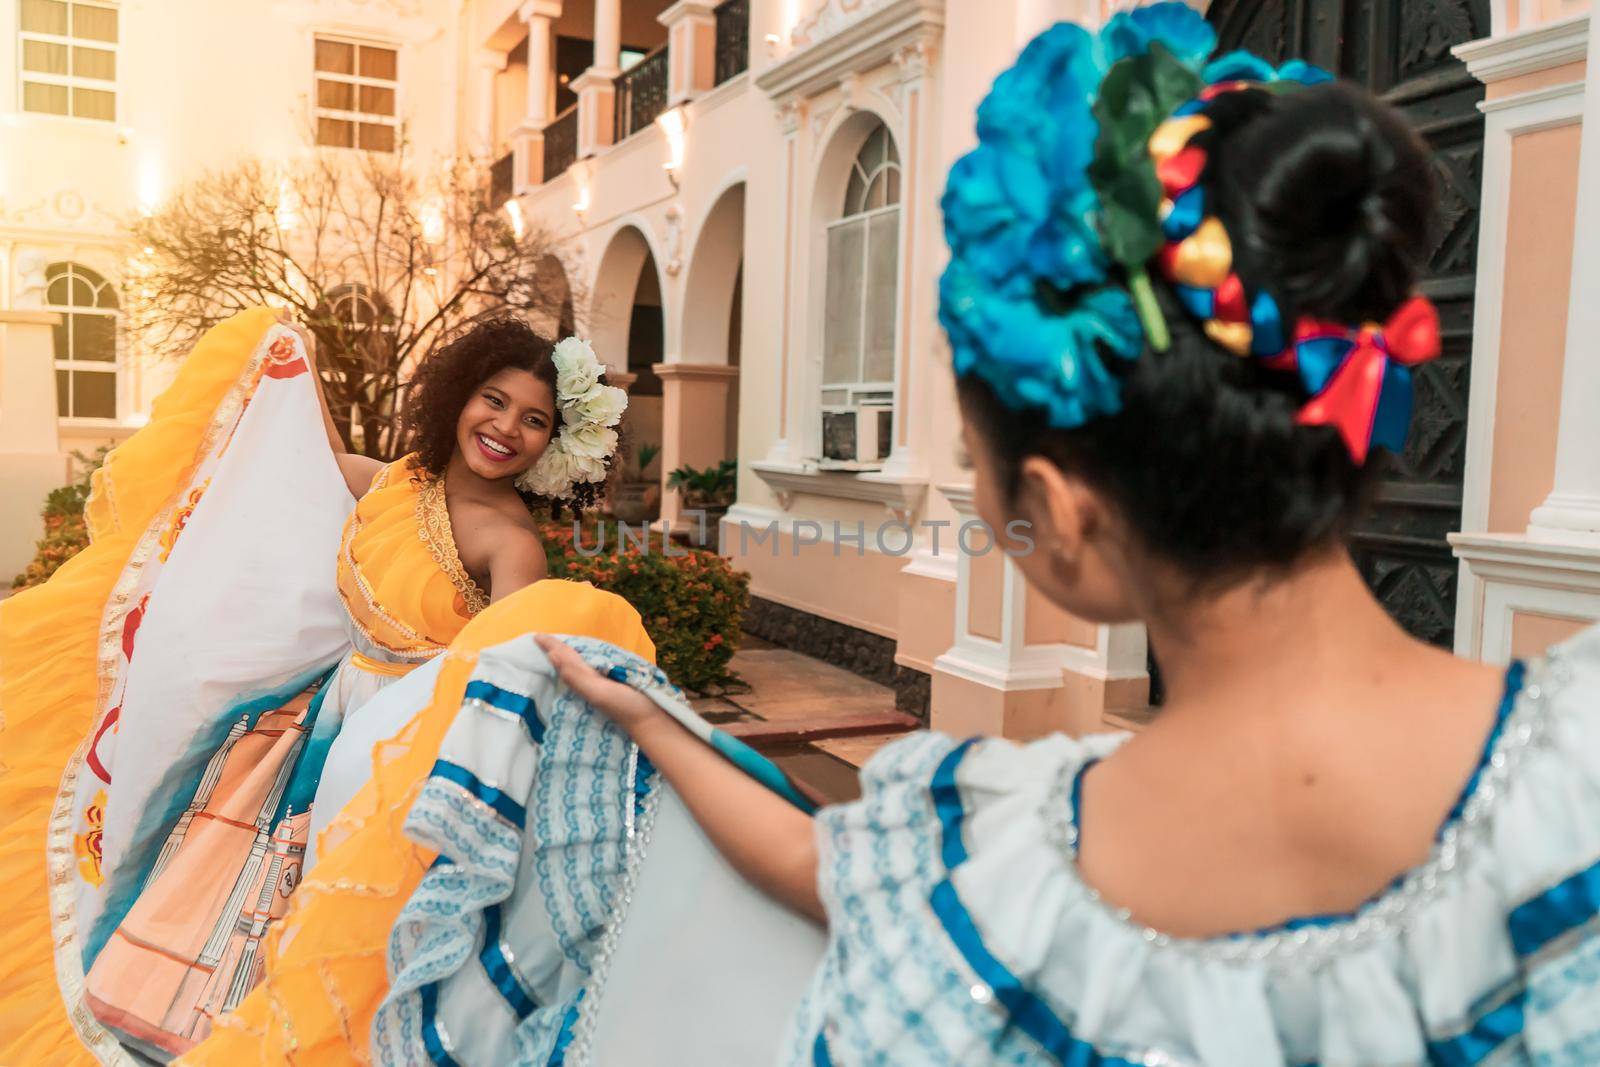 Two young Latina women, one mestizo and one Hispanic, dancing in traditional Nicaraguan costumes outside a colonial house at sunset.